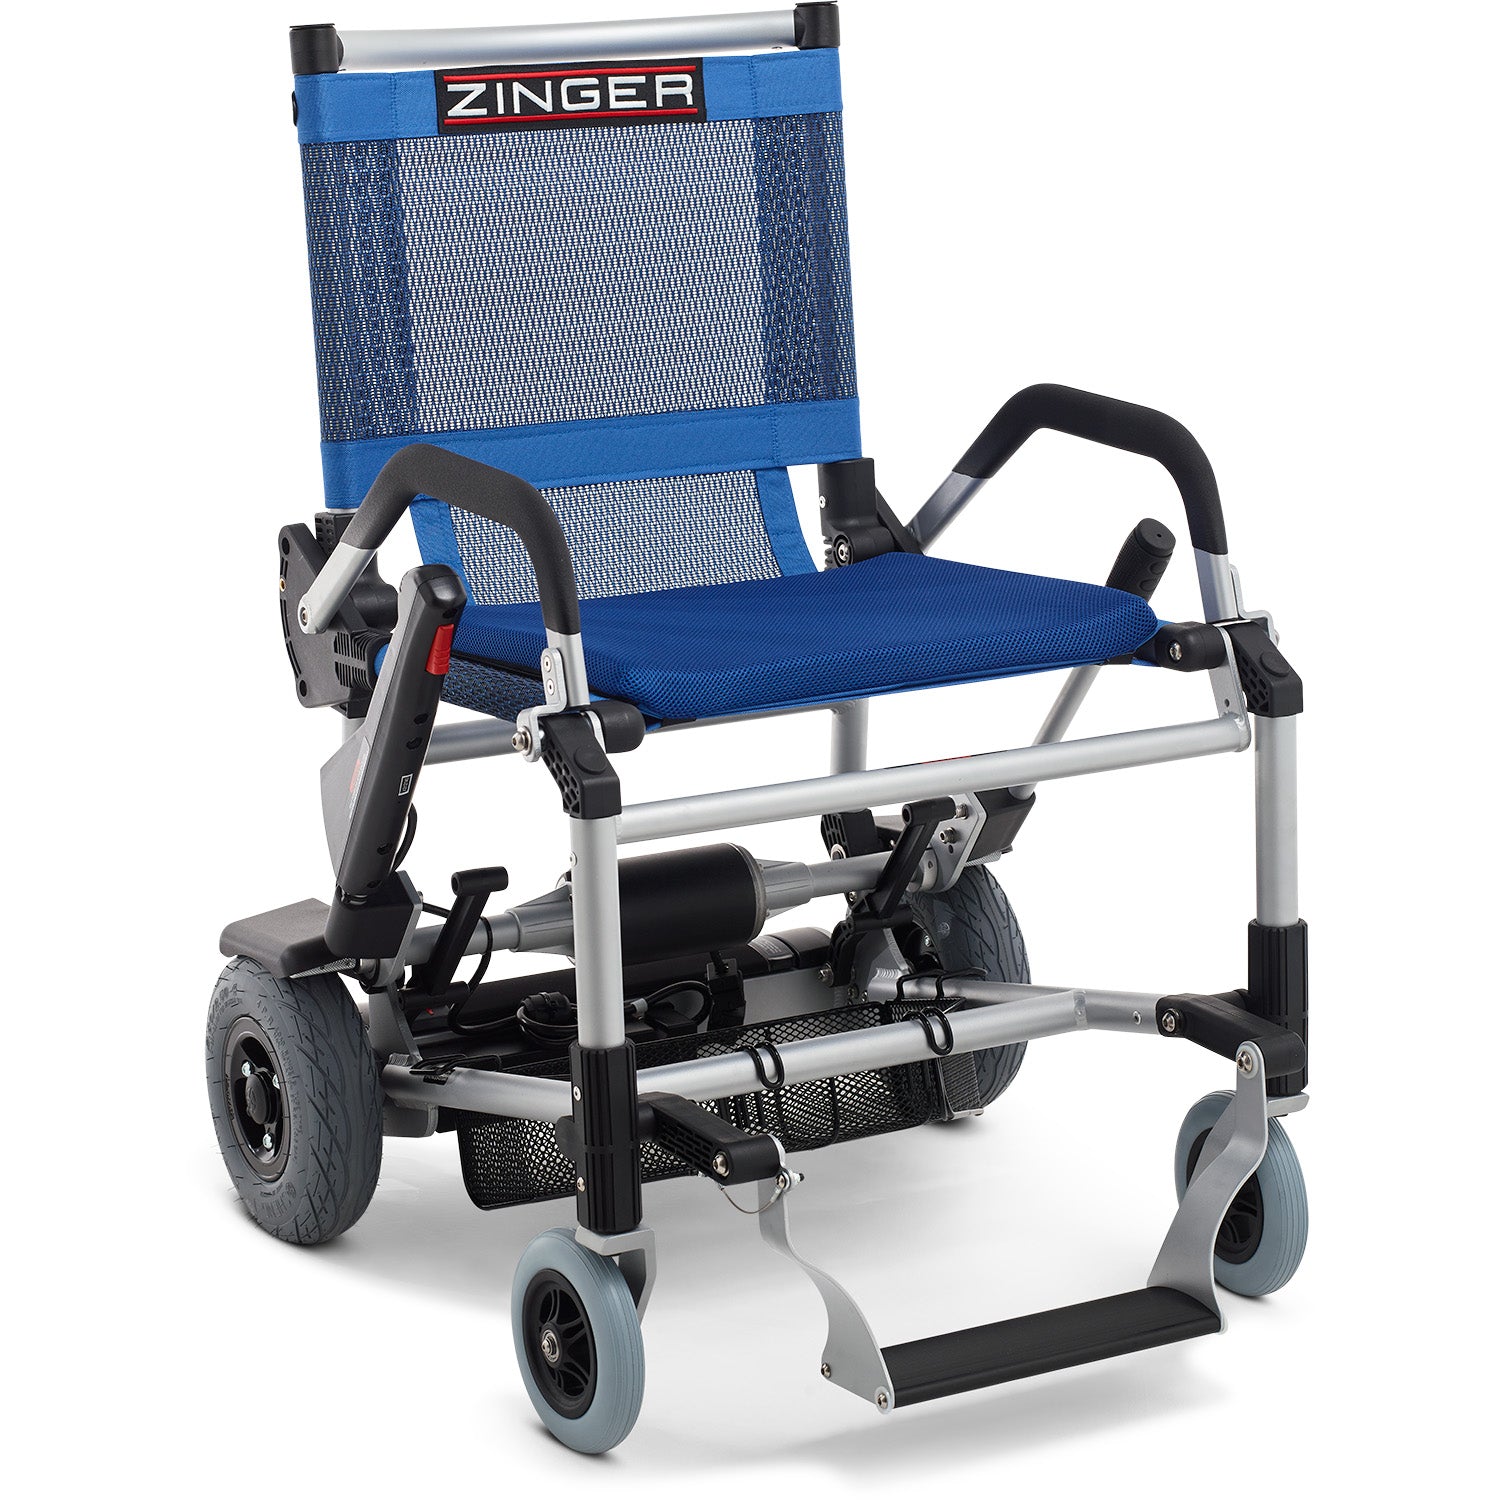 Certified Pre-owned Zinger® Folding Power Chair Two-Handed Control